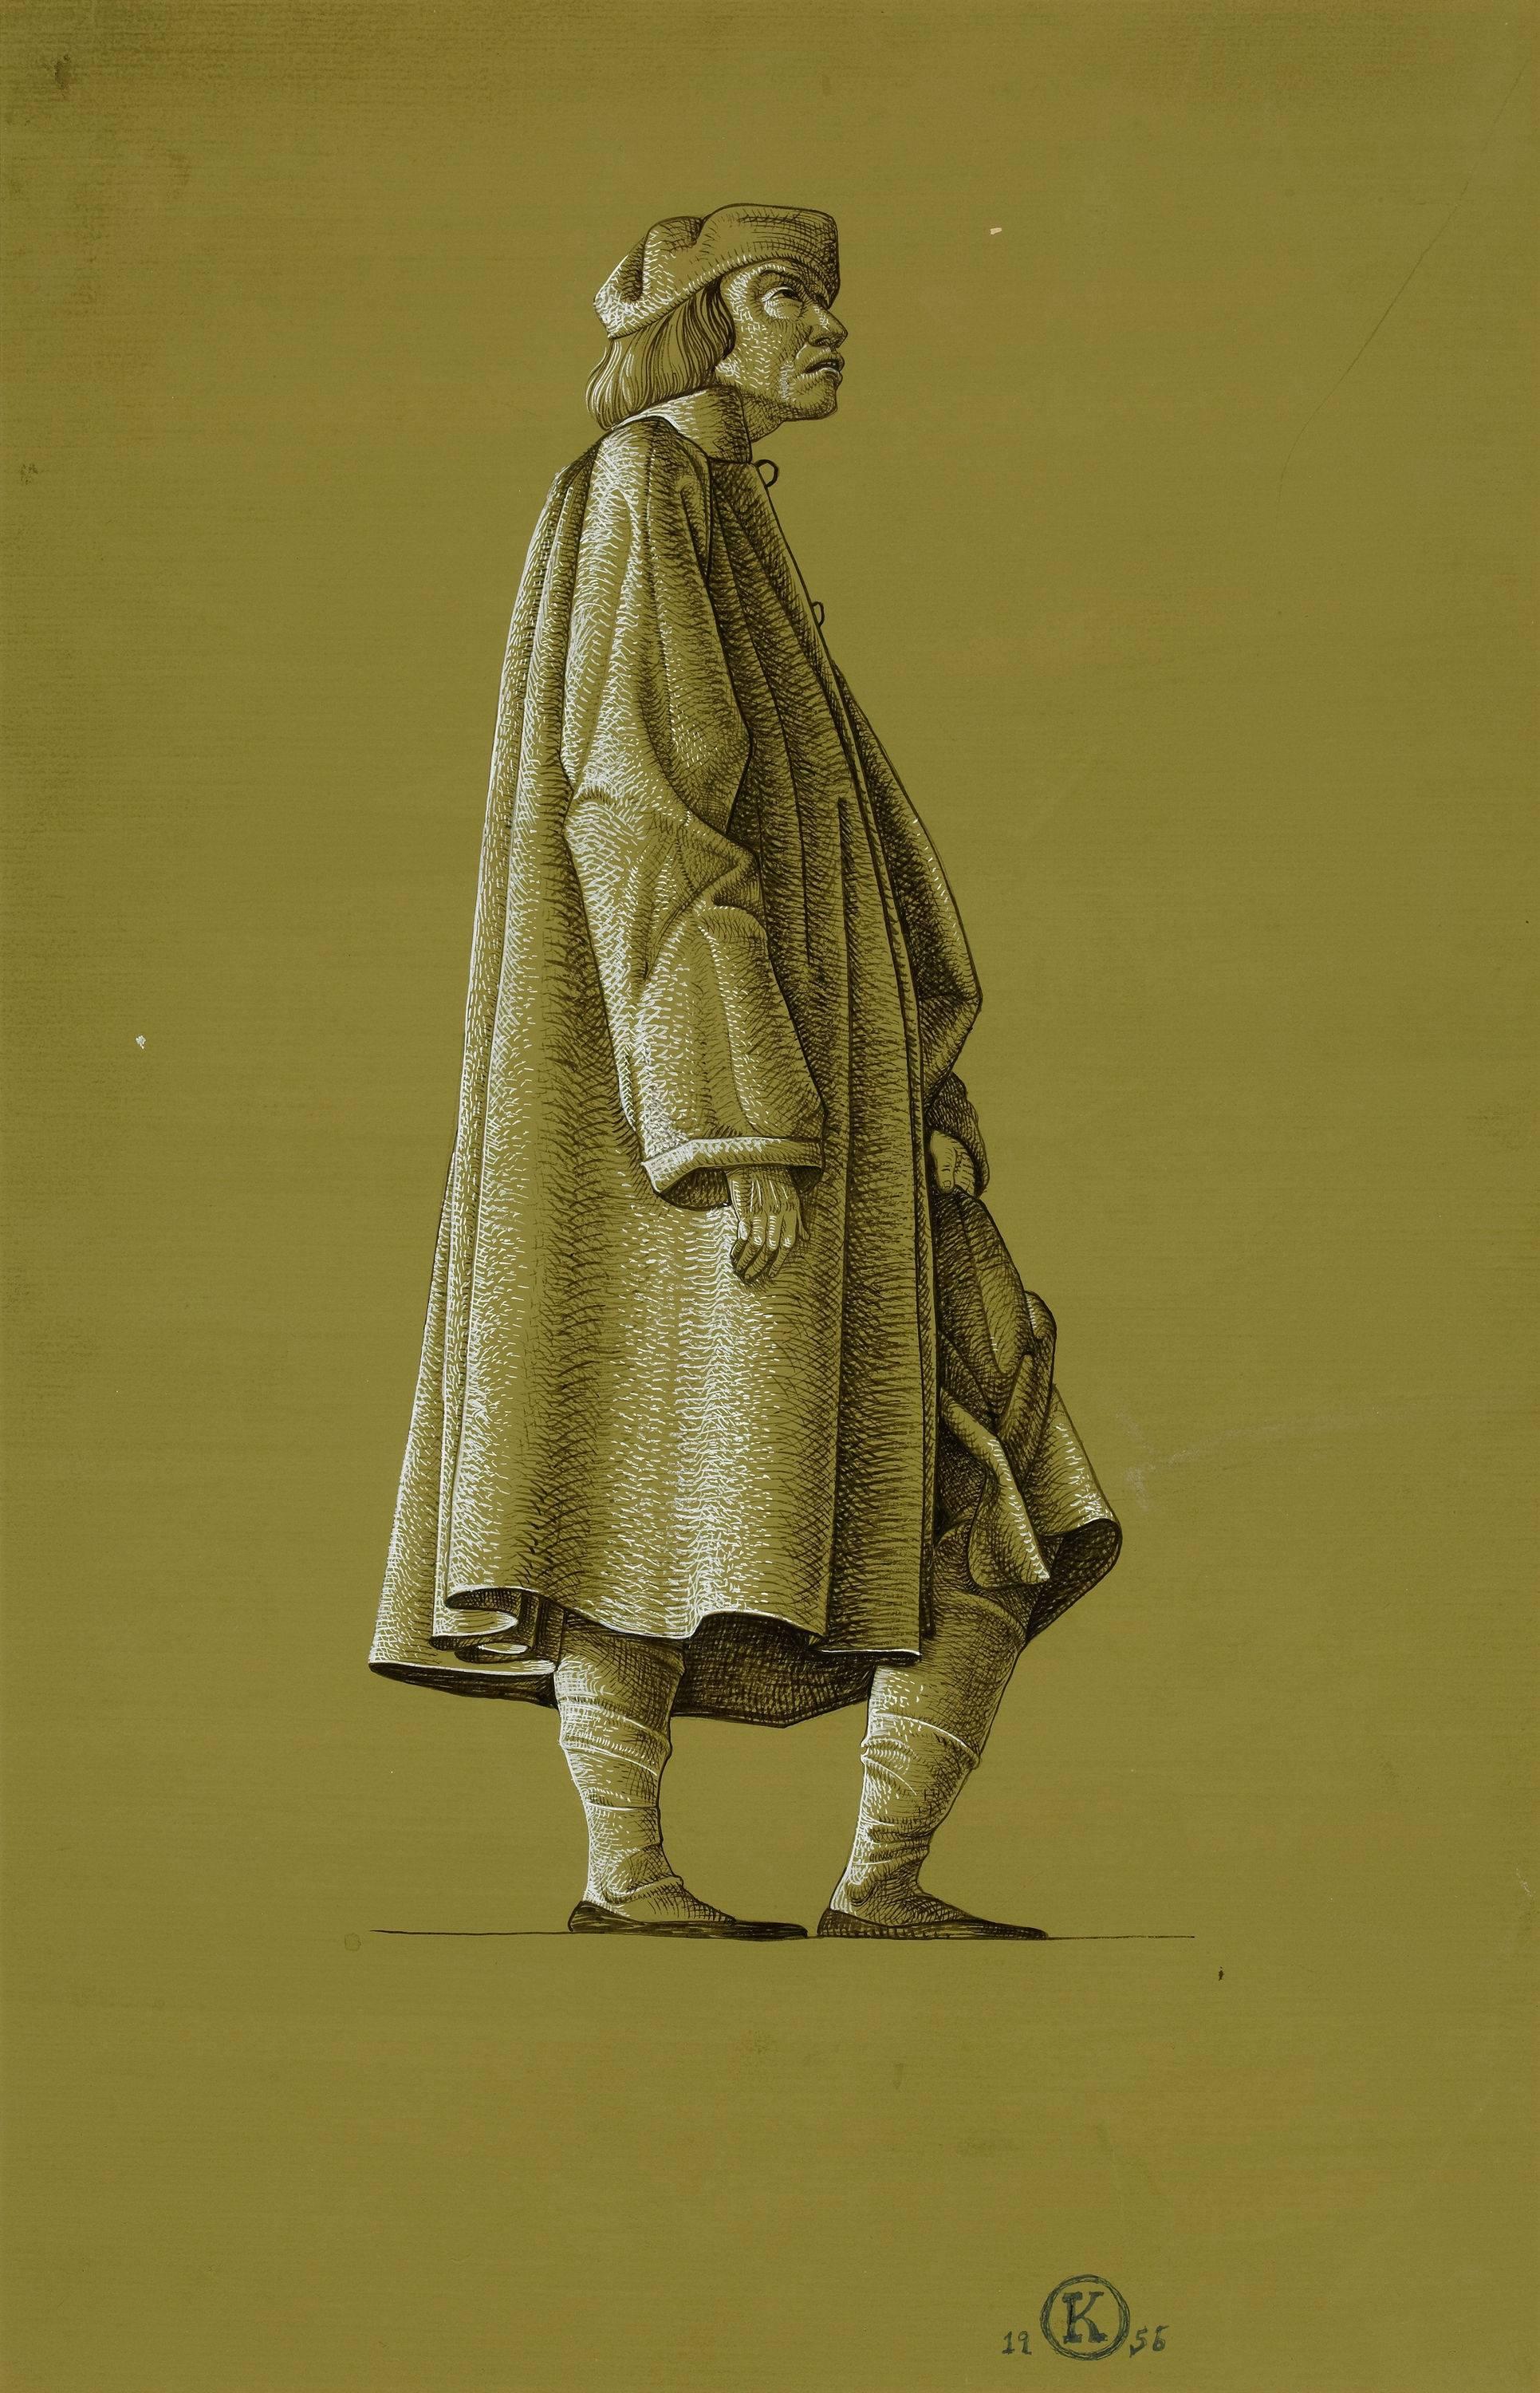 Rockwell Kent Portrait Painting - Finished Drawing of a Man in Medieval Costume